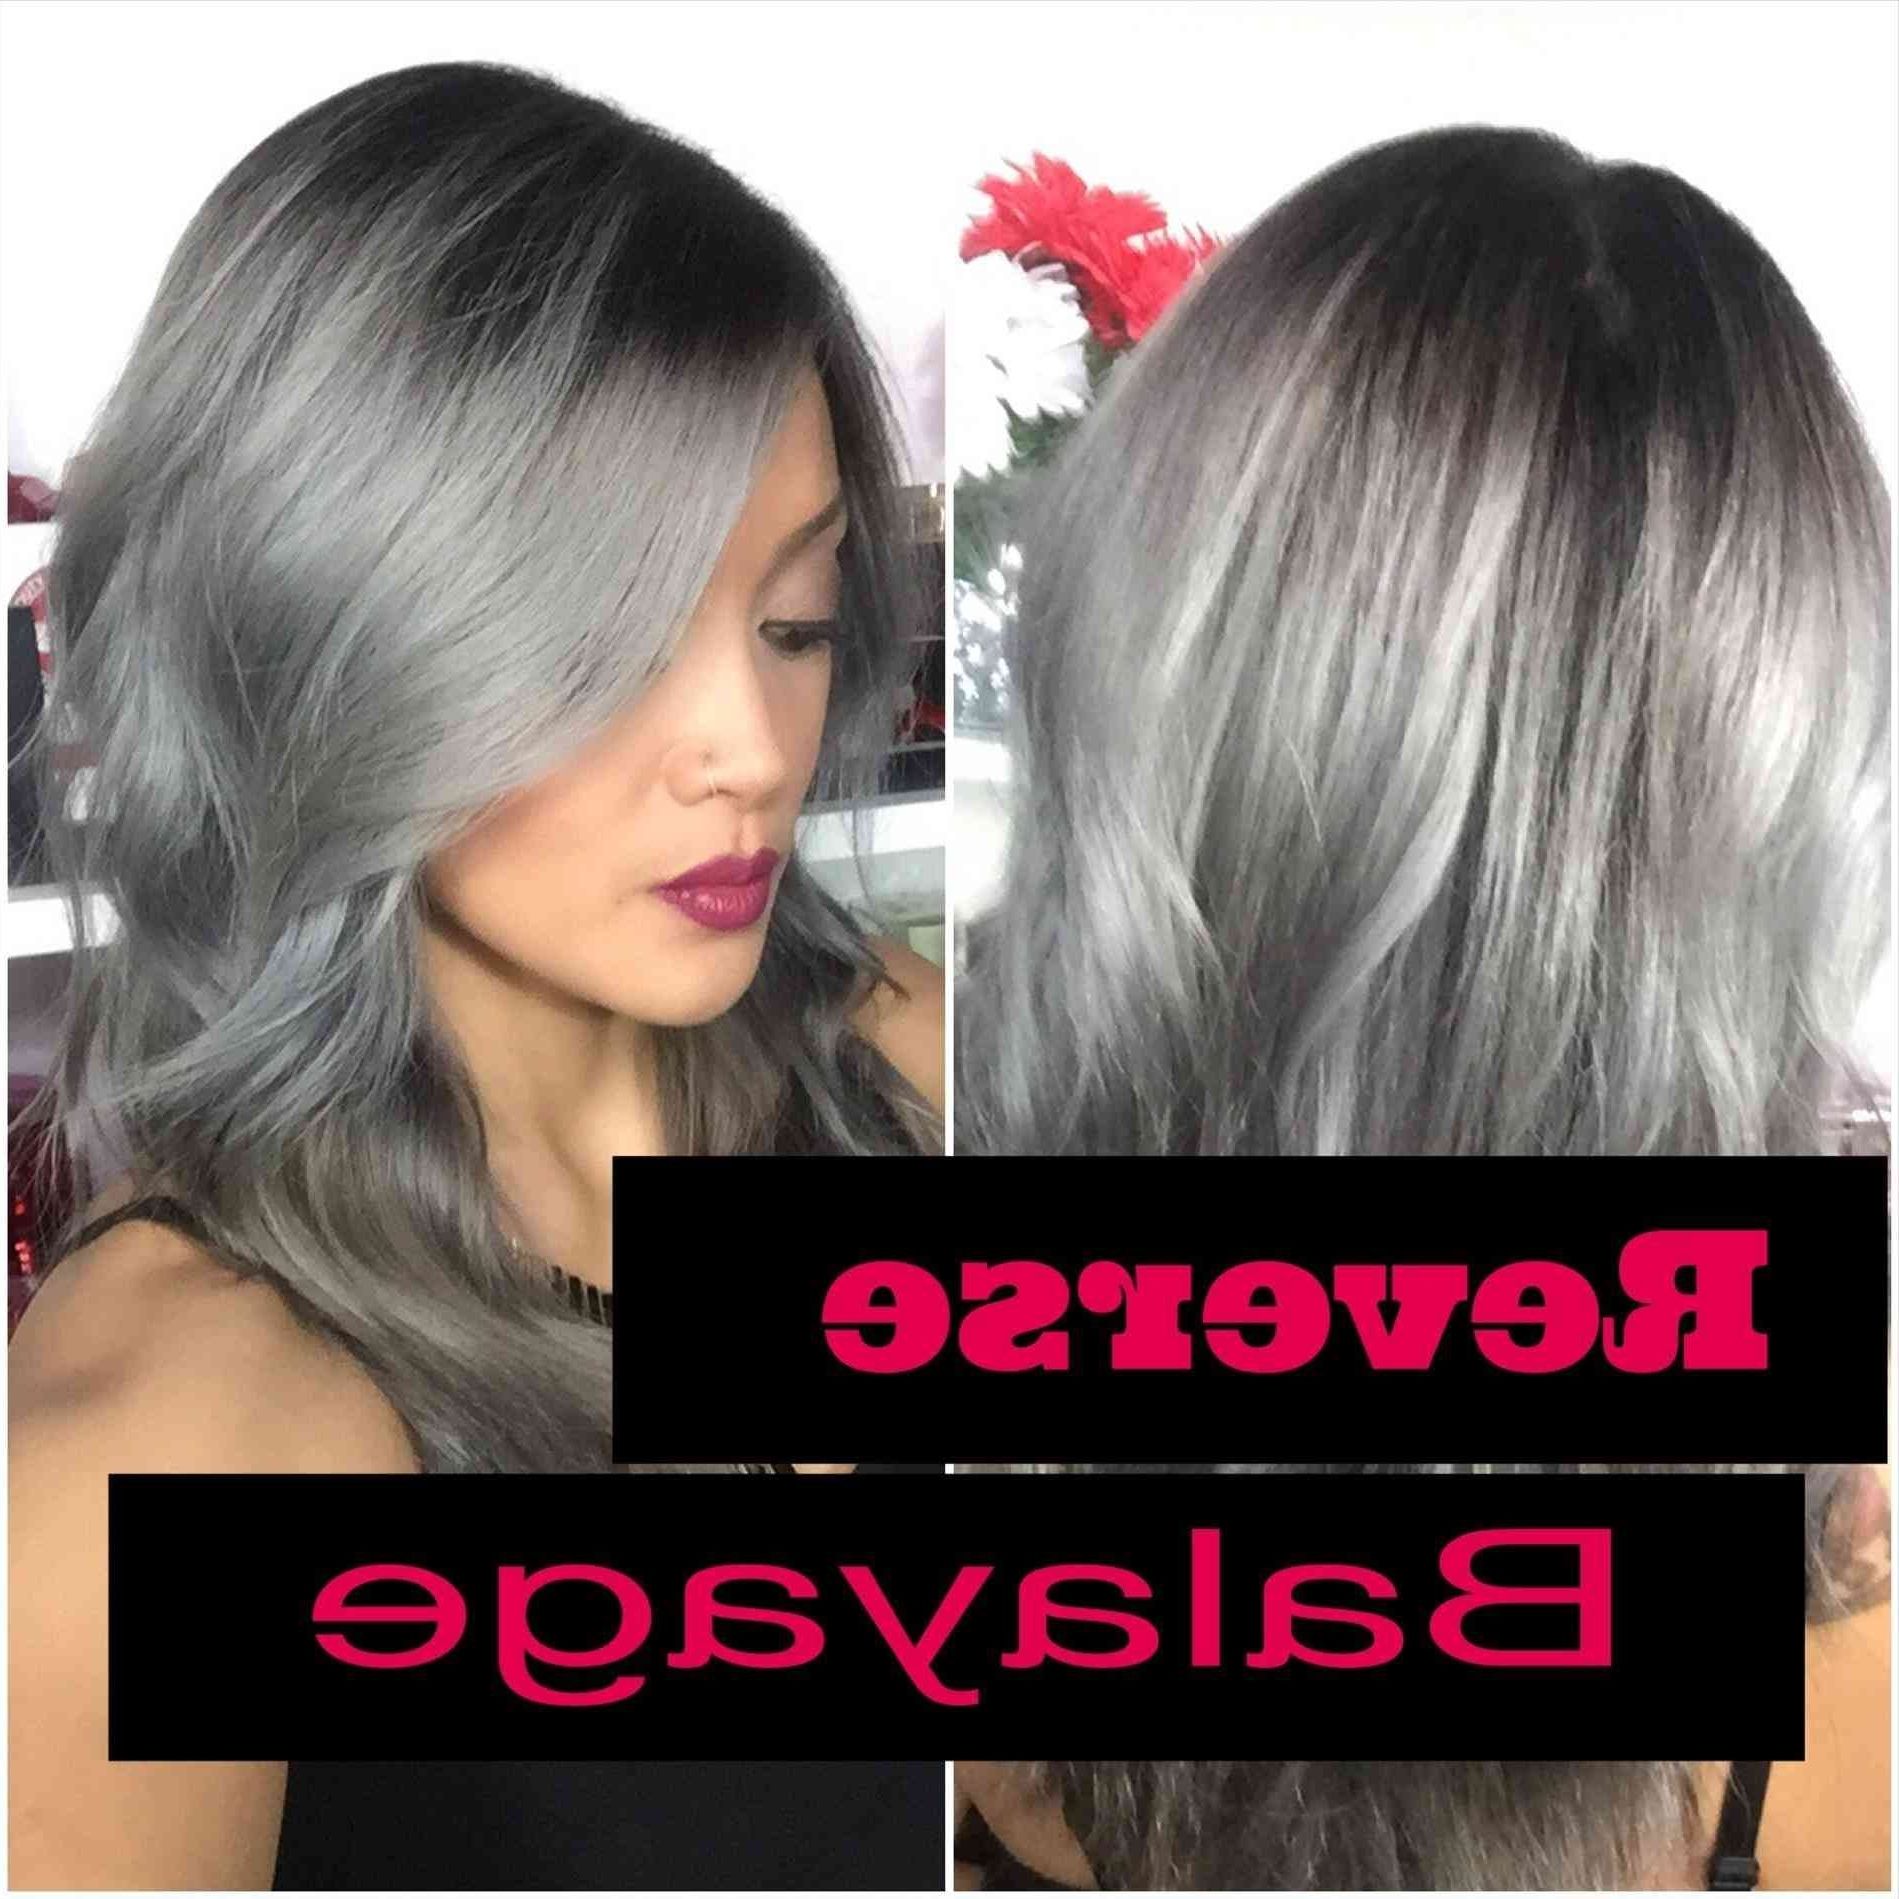 Hair Ombre Hairpainting Idea To Cover The Gray Crap My Mom U I Want Intended For Recent Reverse Gray Ombre For Short Hair (View 15 of 15)